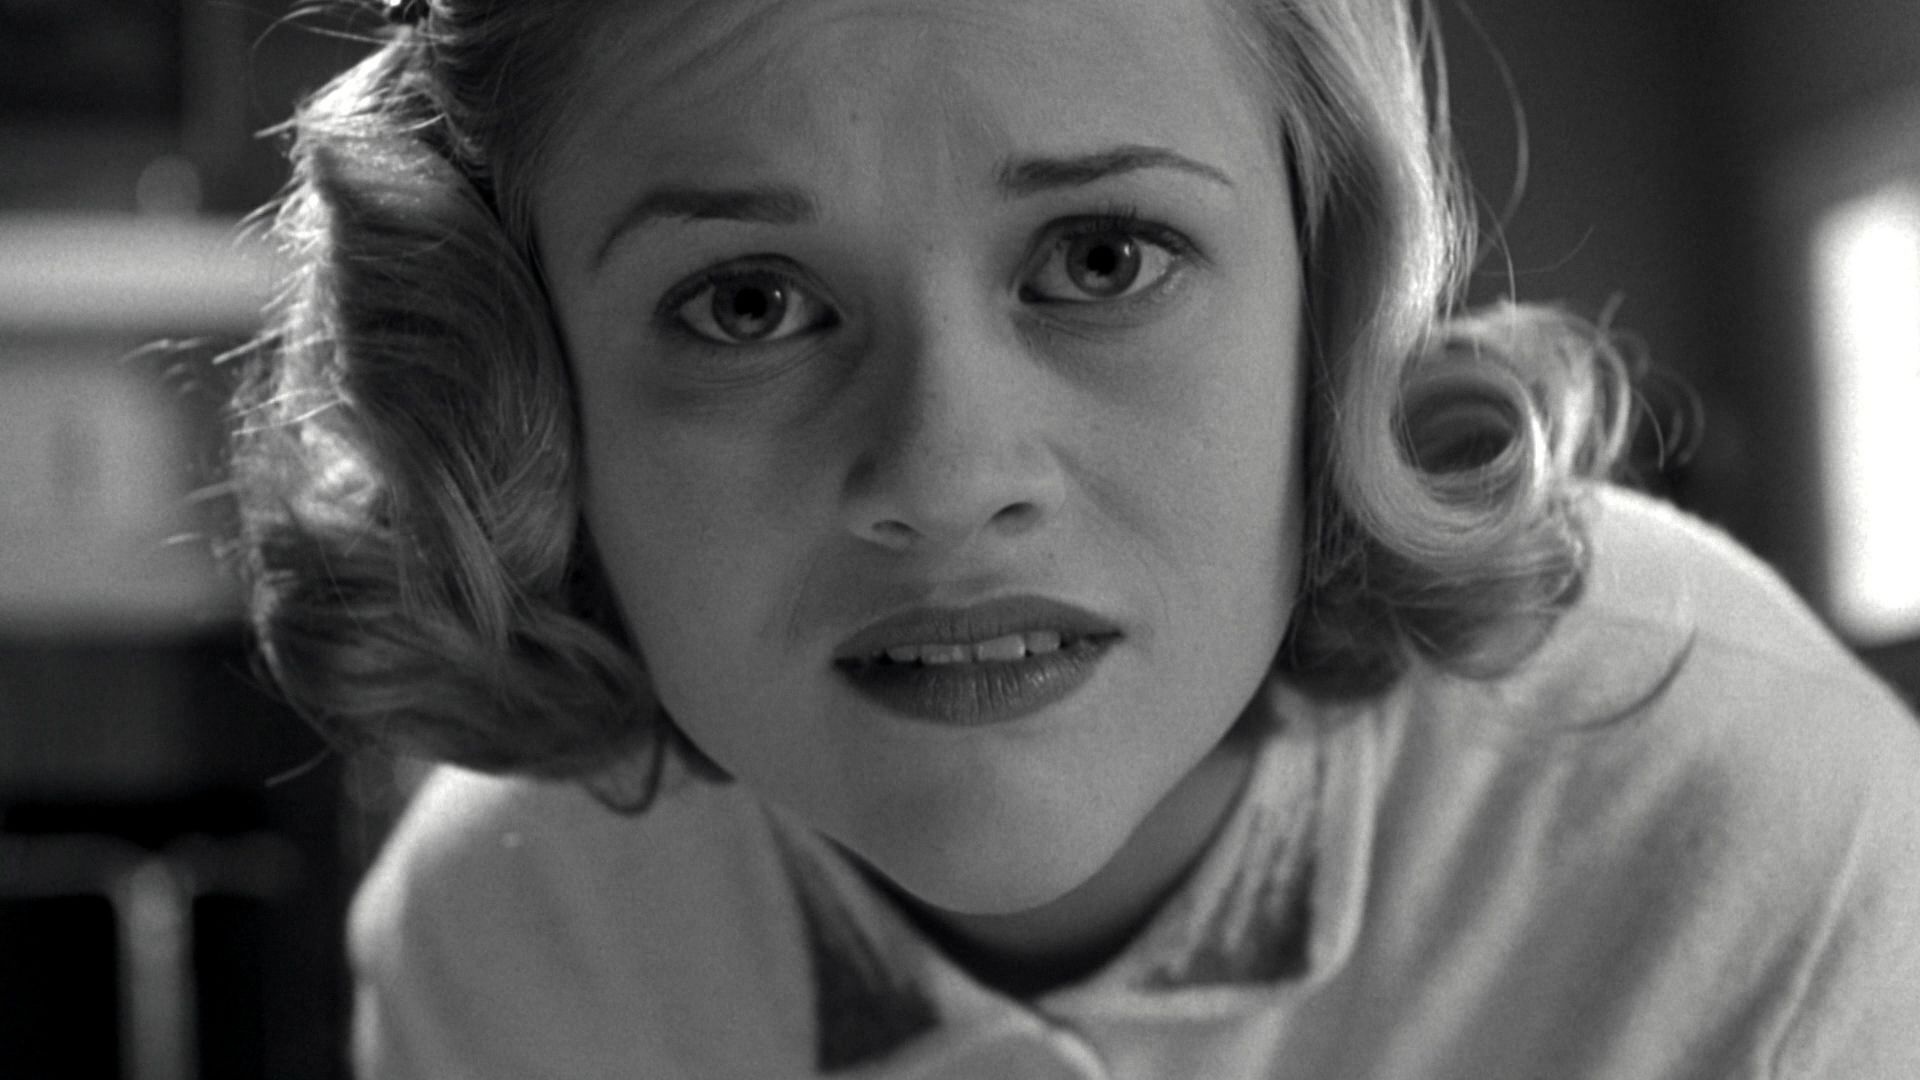 Pleasantville, Reese Witherspoon's standout performance, Memorable movie moments, Good film recommendations, 1920x1080 Full HD Desktop